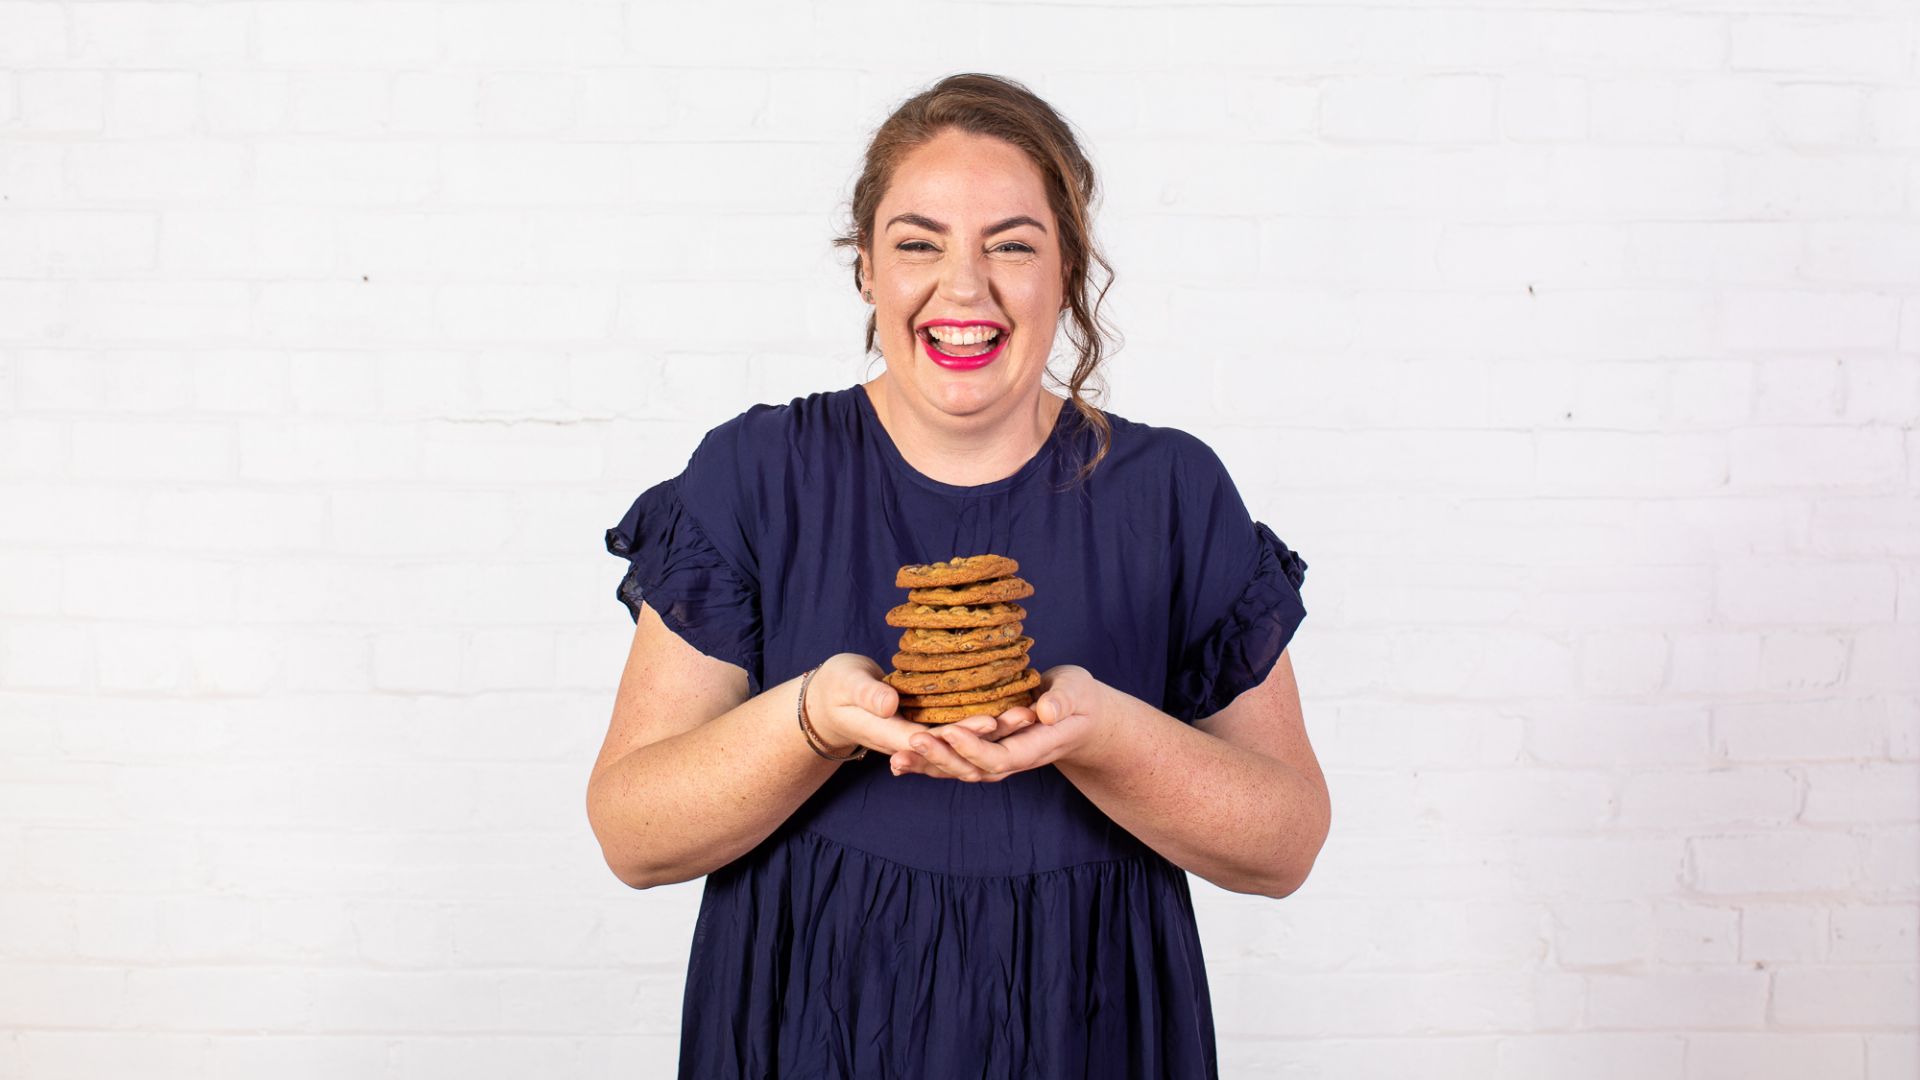 When it comes to business, Meredith West is one smart cookie